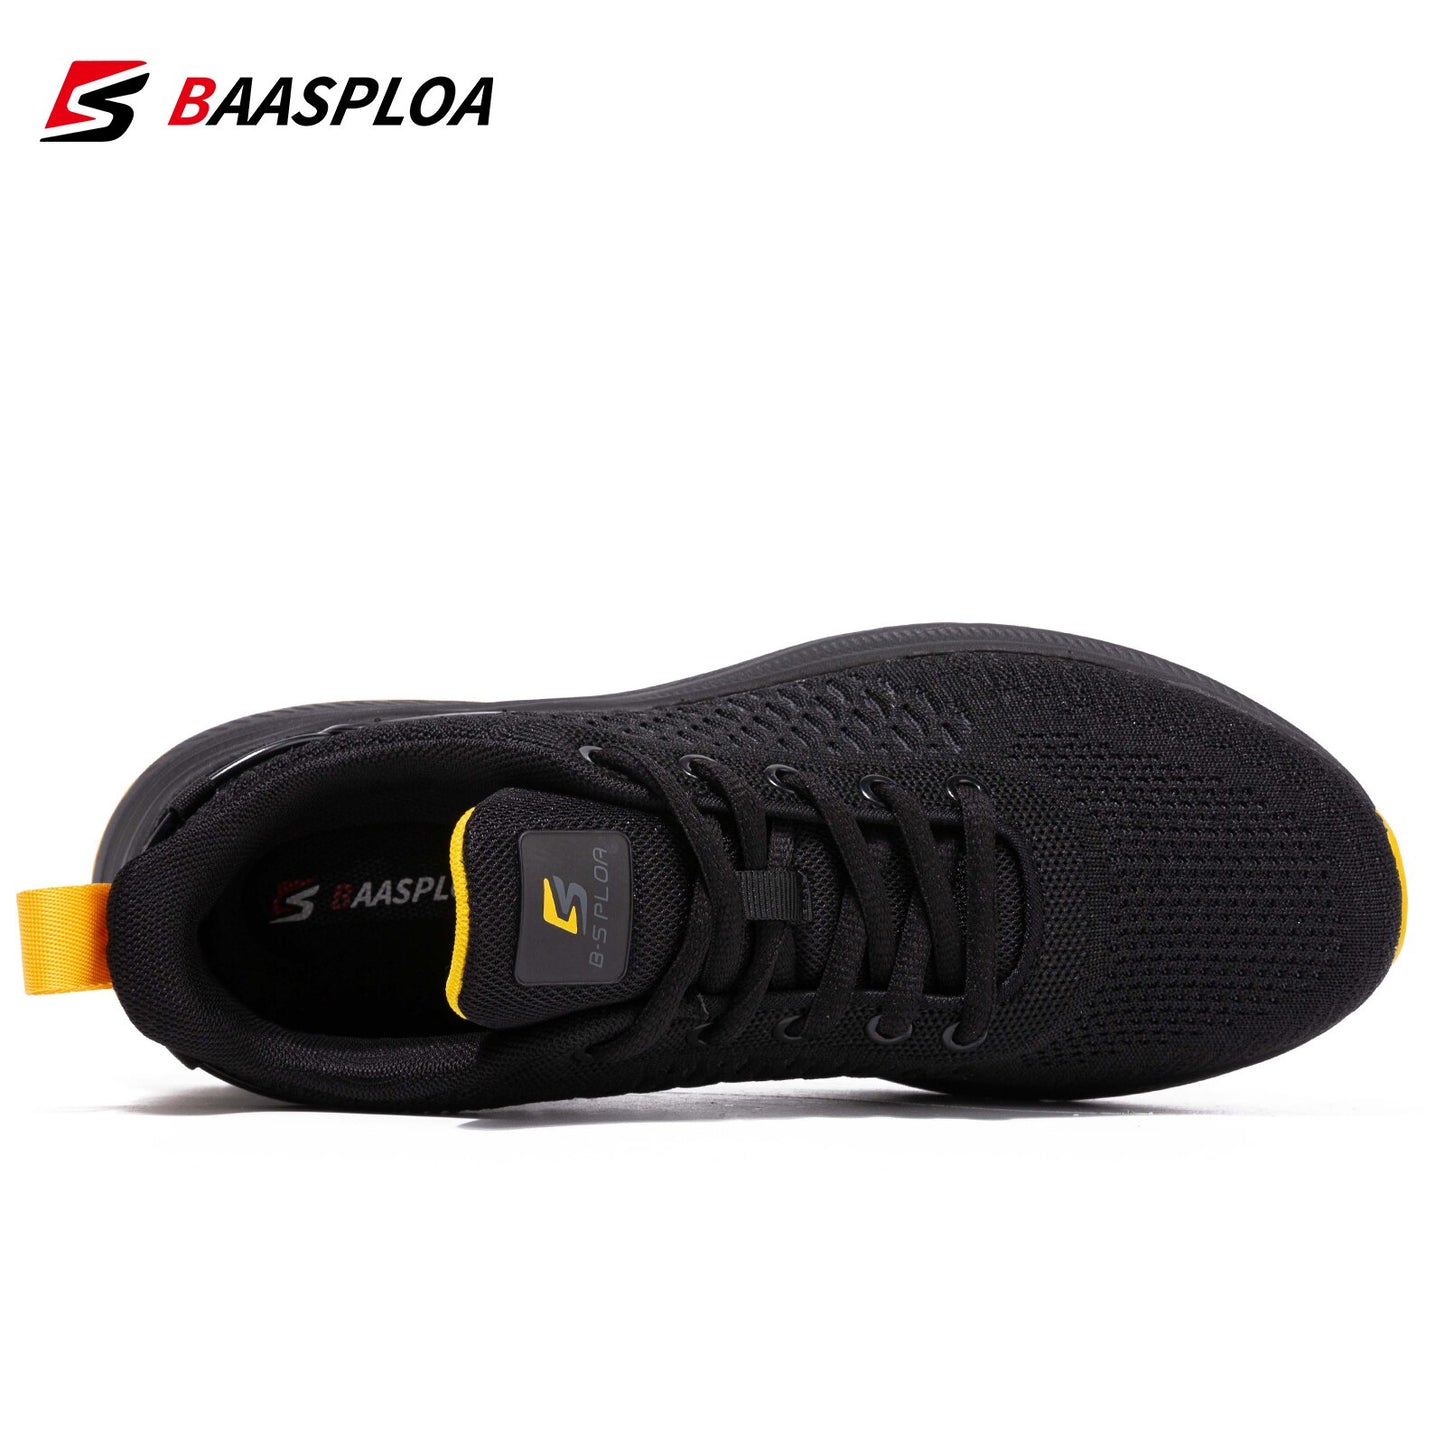 Baasploa Lightweight Running Shoes For Men 2022 Men's Designer Mesh Casual Sneakers Lace-Up Male Outdoor Sports Tennis Shoe